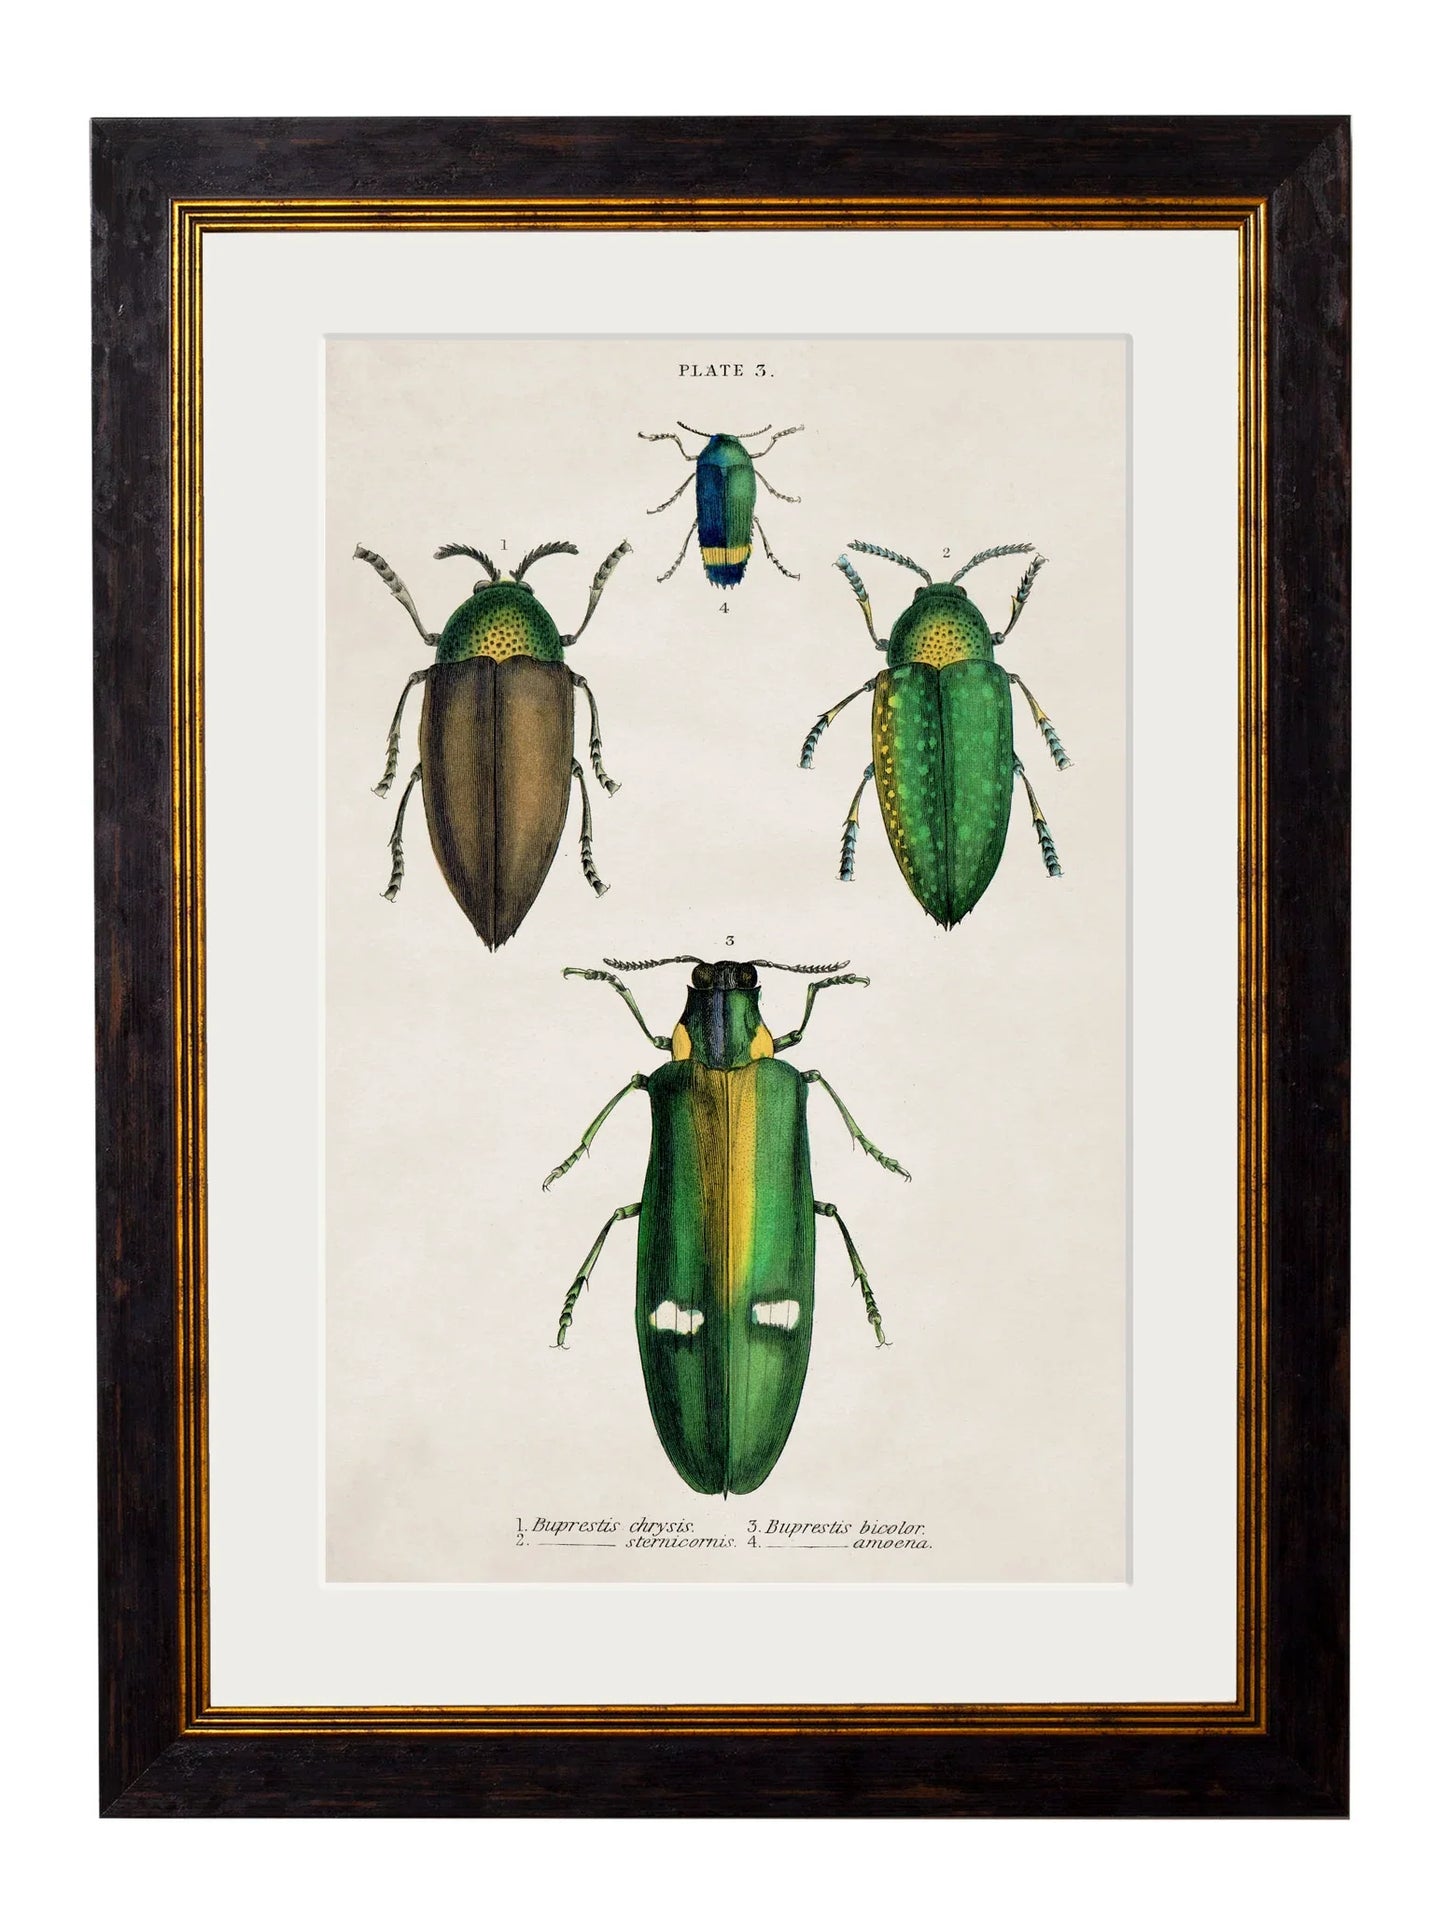 C.1836 Studies of Beetles for sale - Woodcock and Cavendish